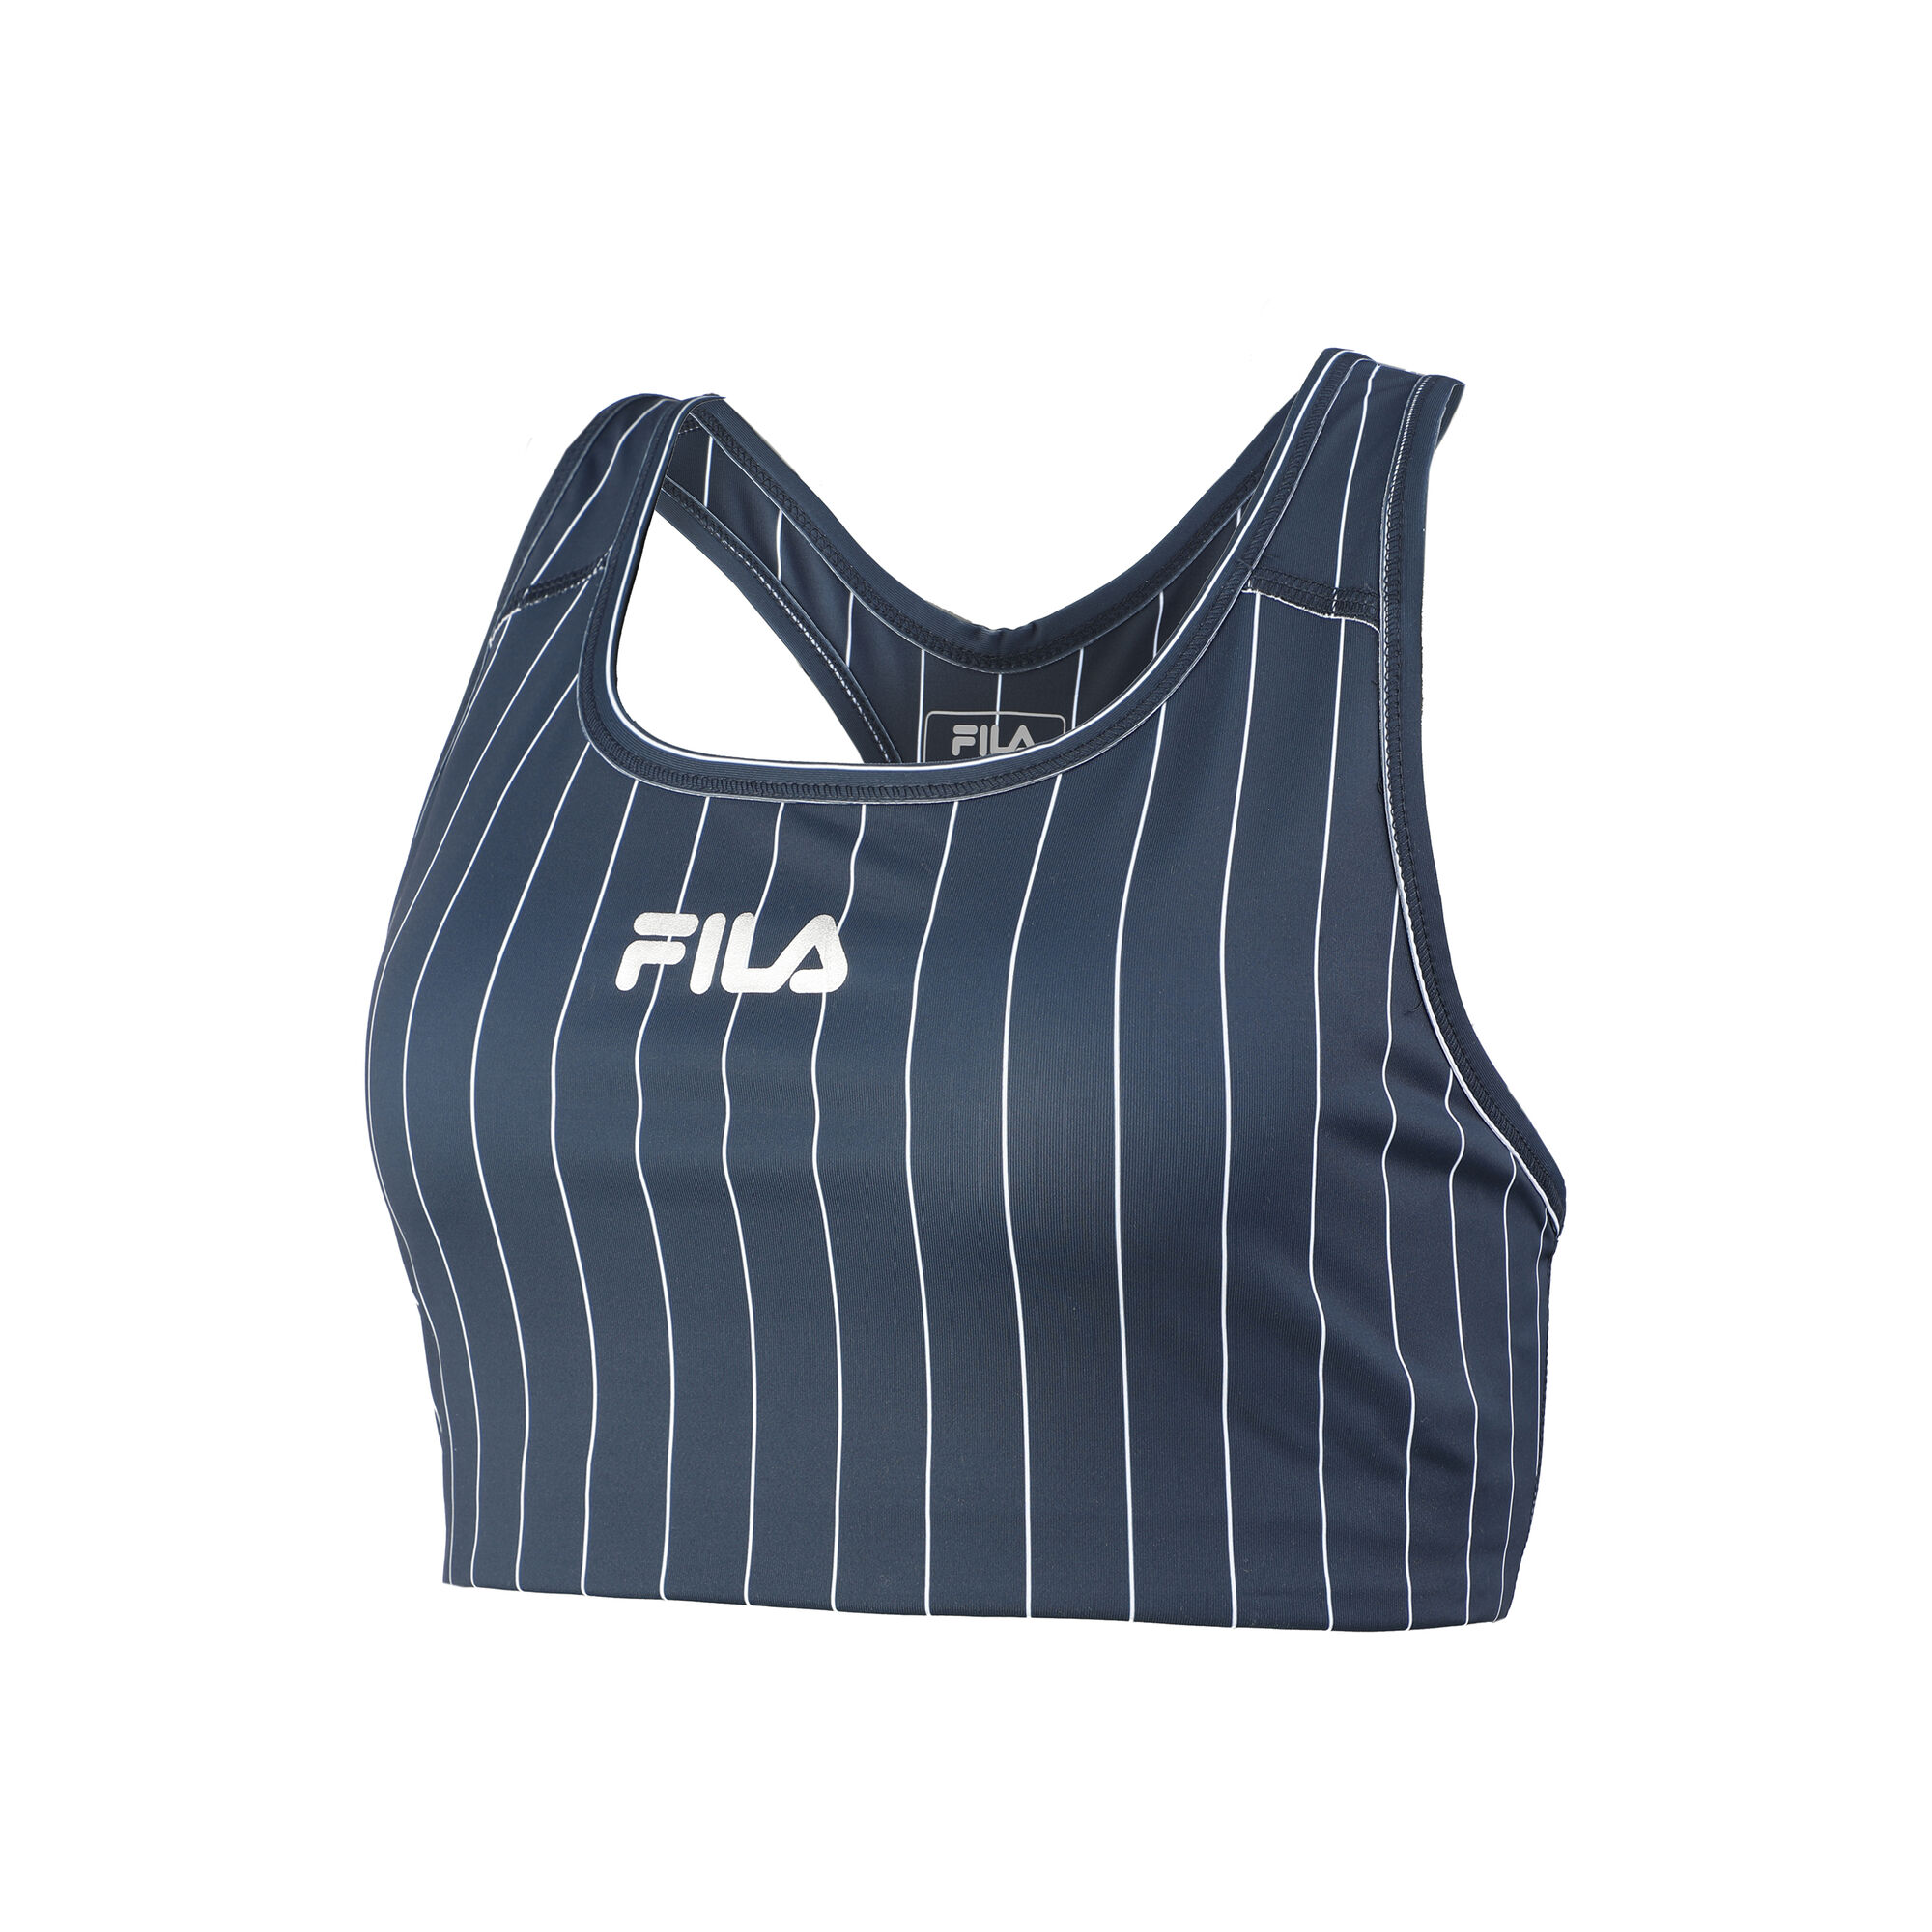 Fila Tracksuit  Fila outfit, Casual outfits, Outfits with leggings